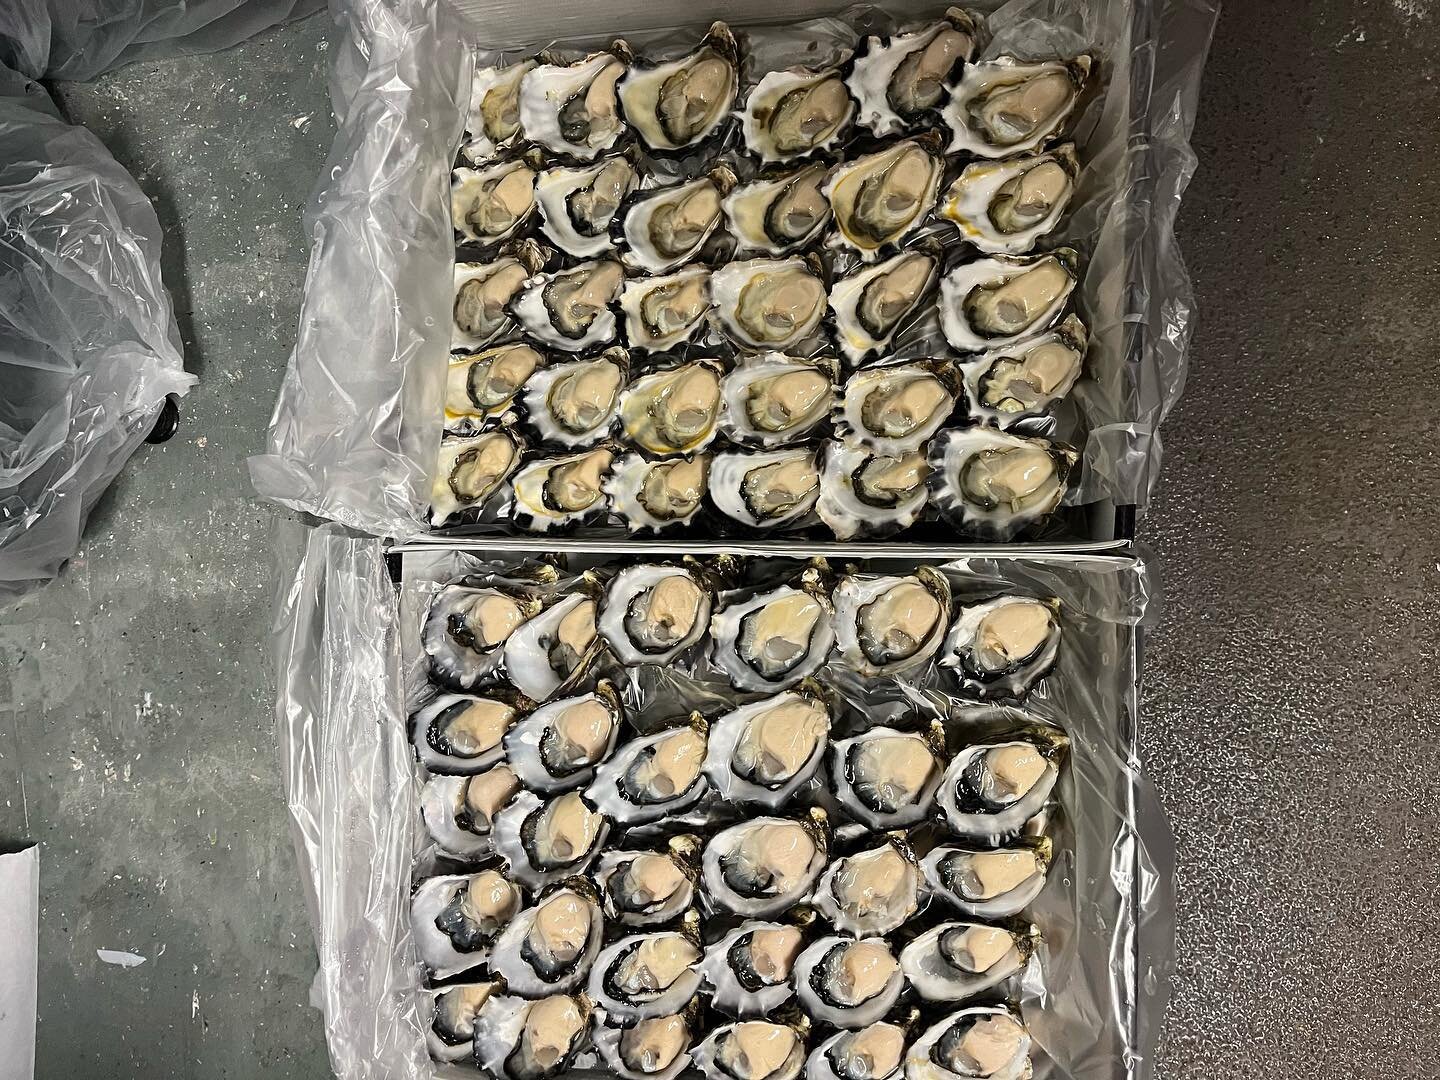 Whether it&rsquo;s rock or pacific oysters we have you covered #oysters #northernriversproduce #premiumseafood #balinaoysters#supportlocal